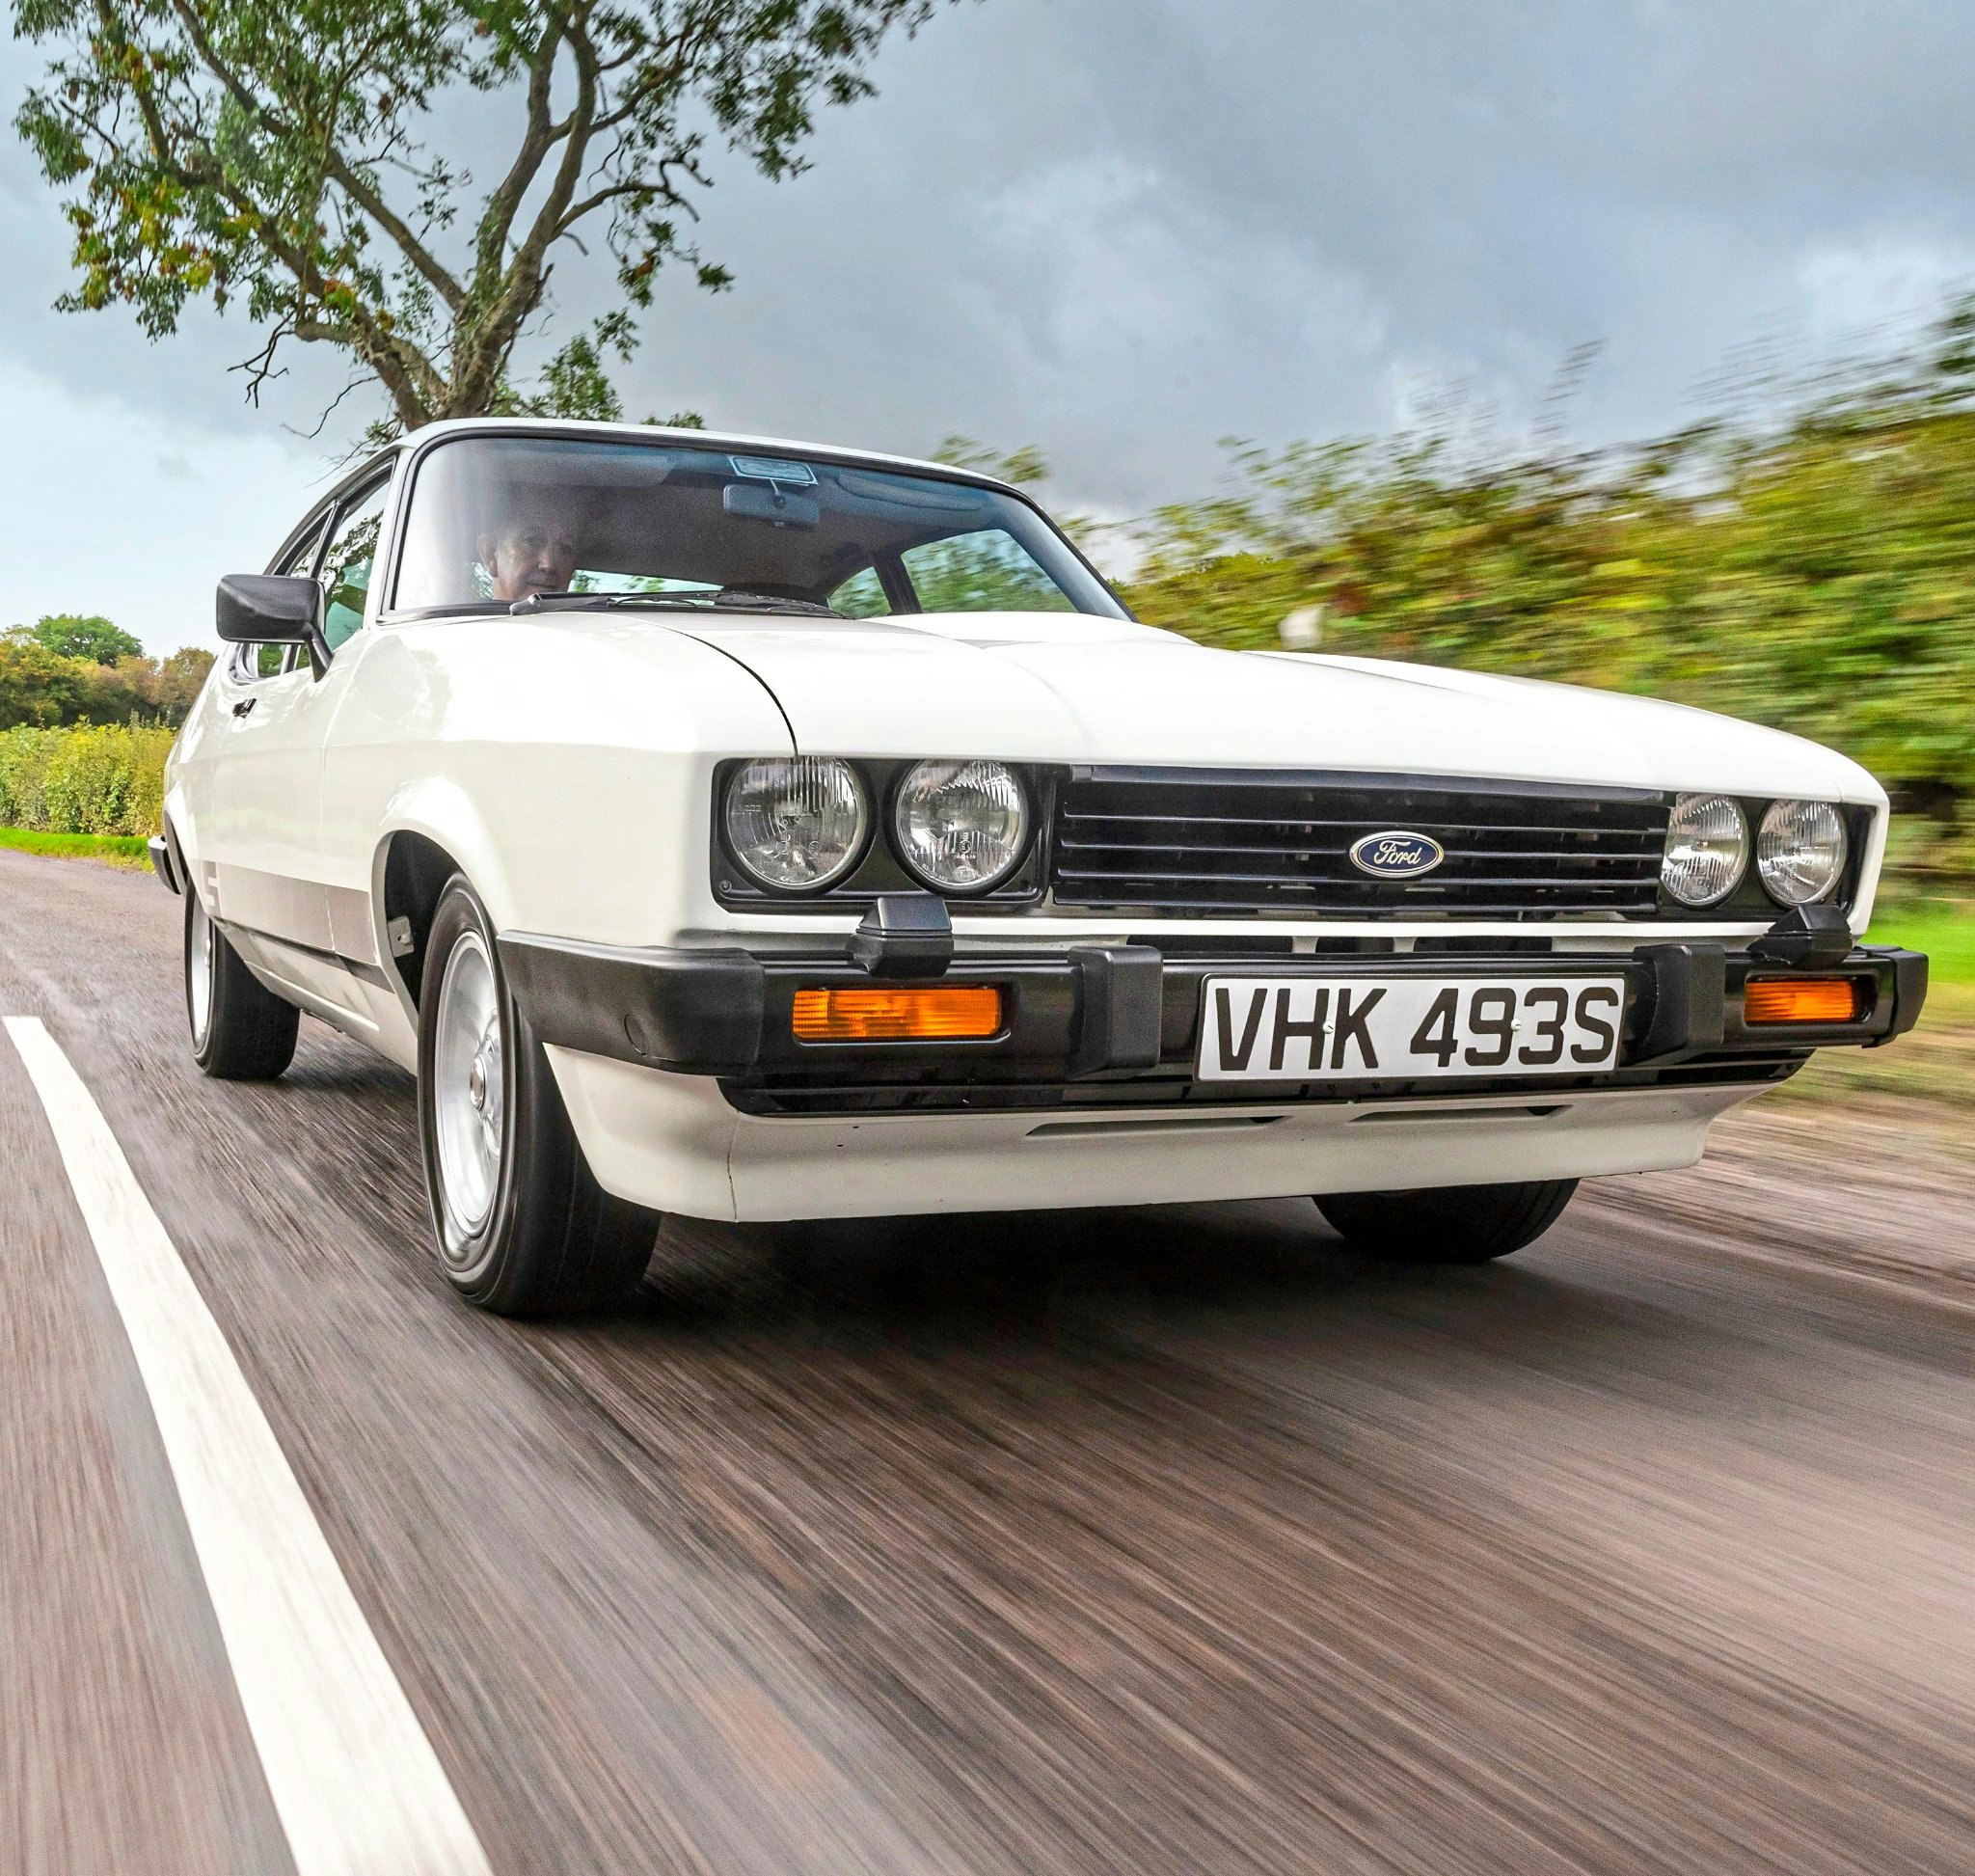 1972 Ford Capri - the only one of its kind - with just one owner